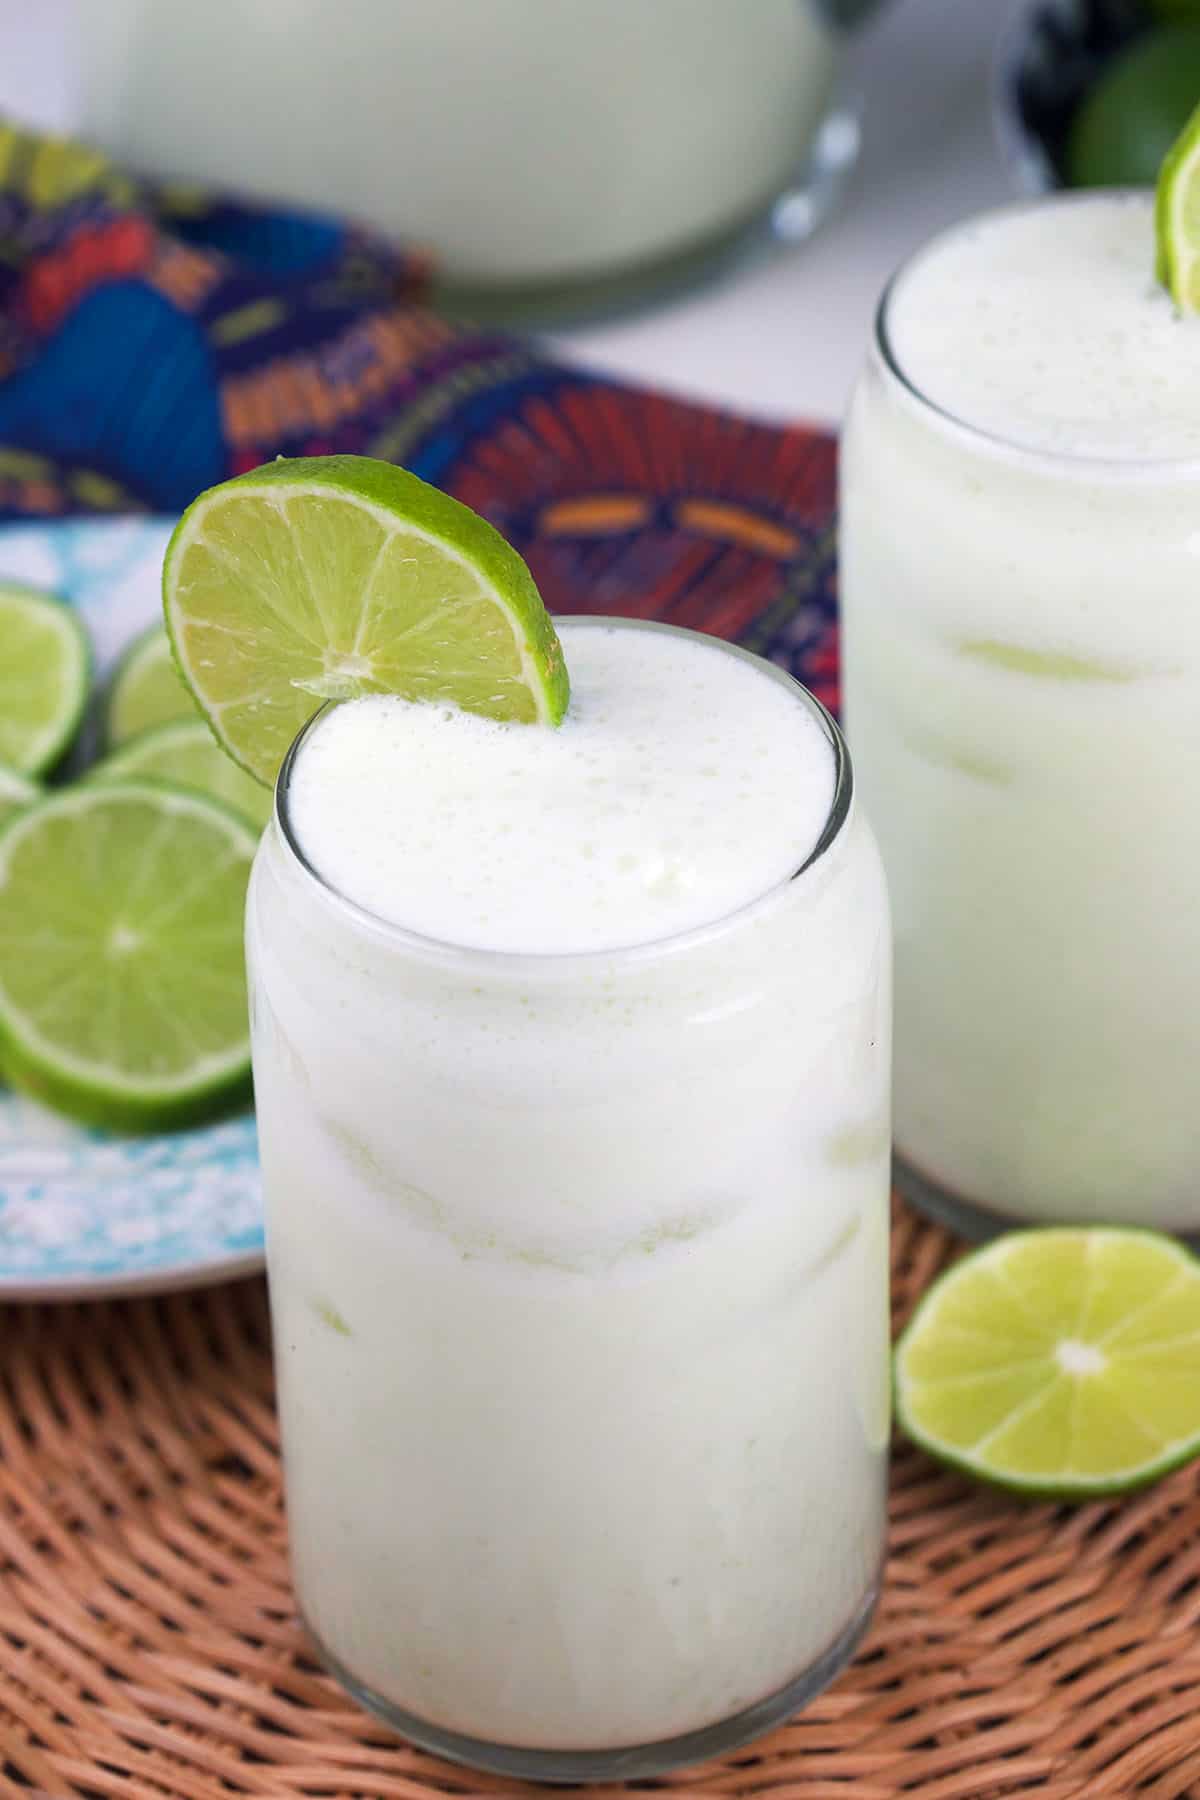 A slice of lime garnishes a glass of lemonade.  